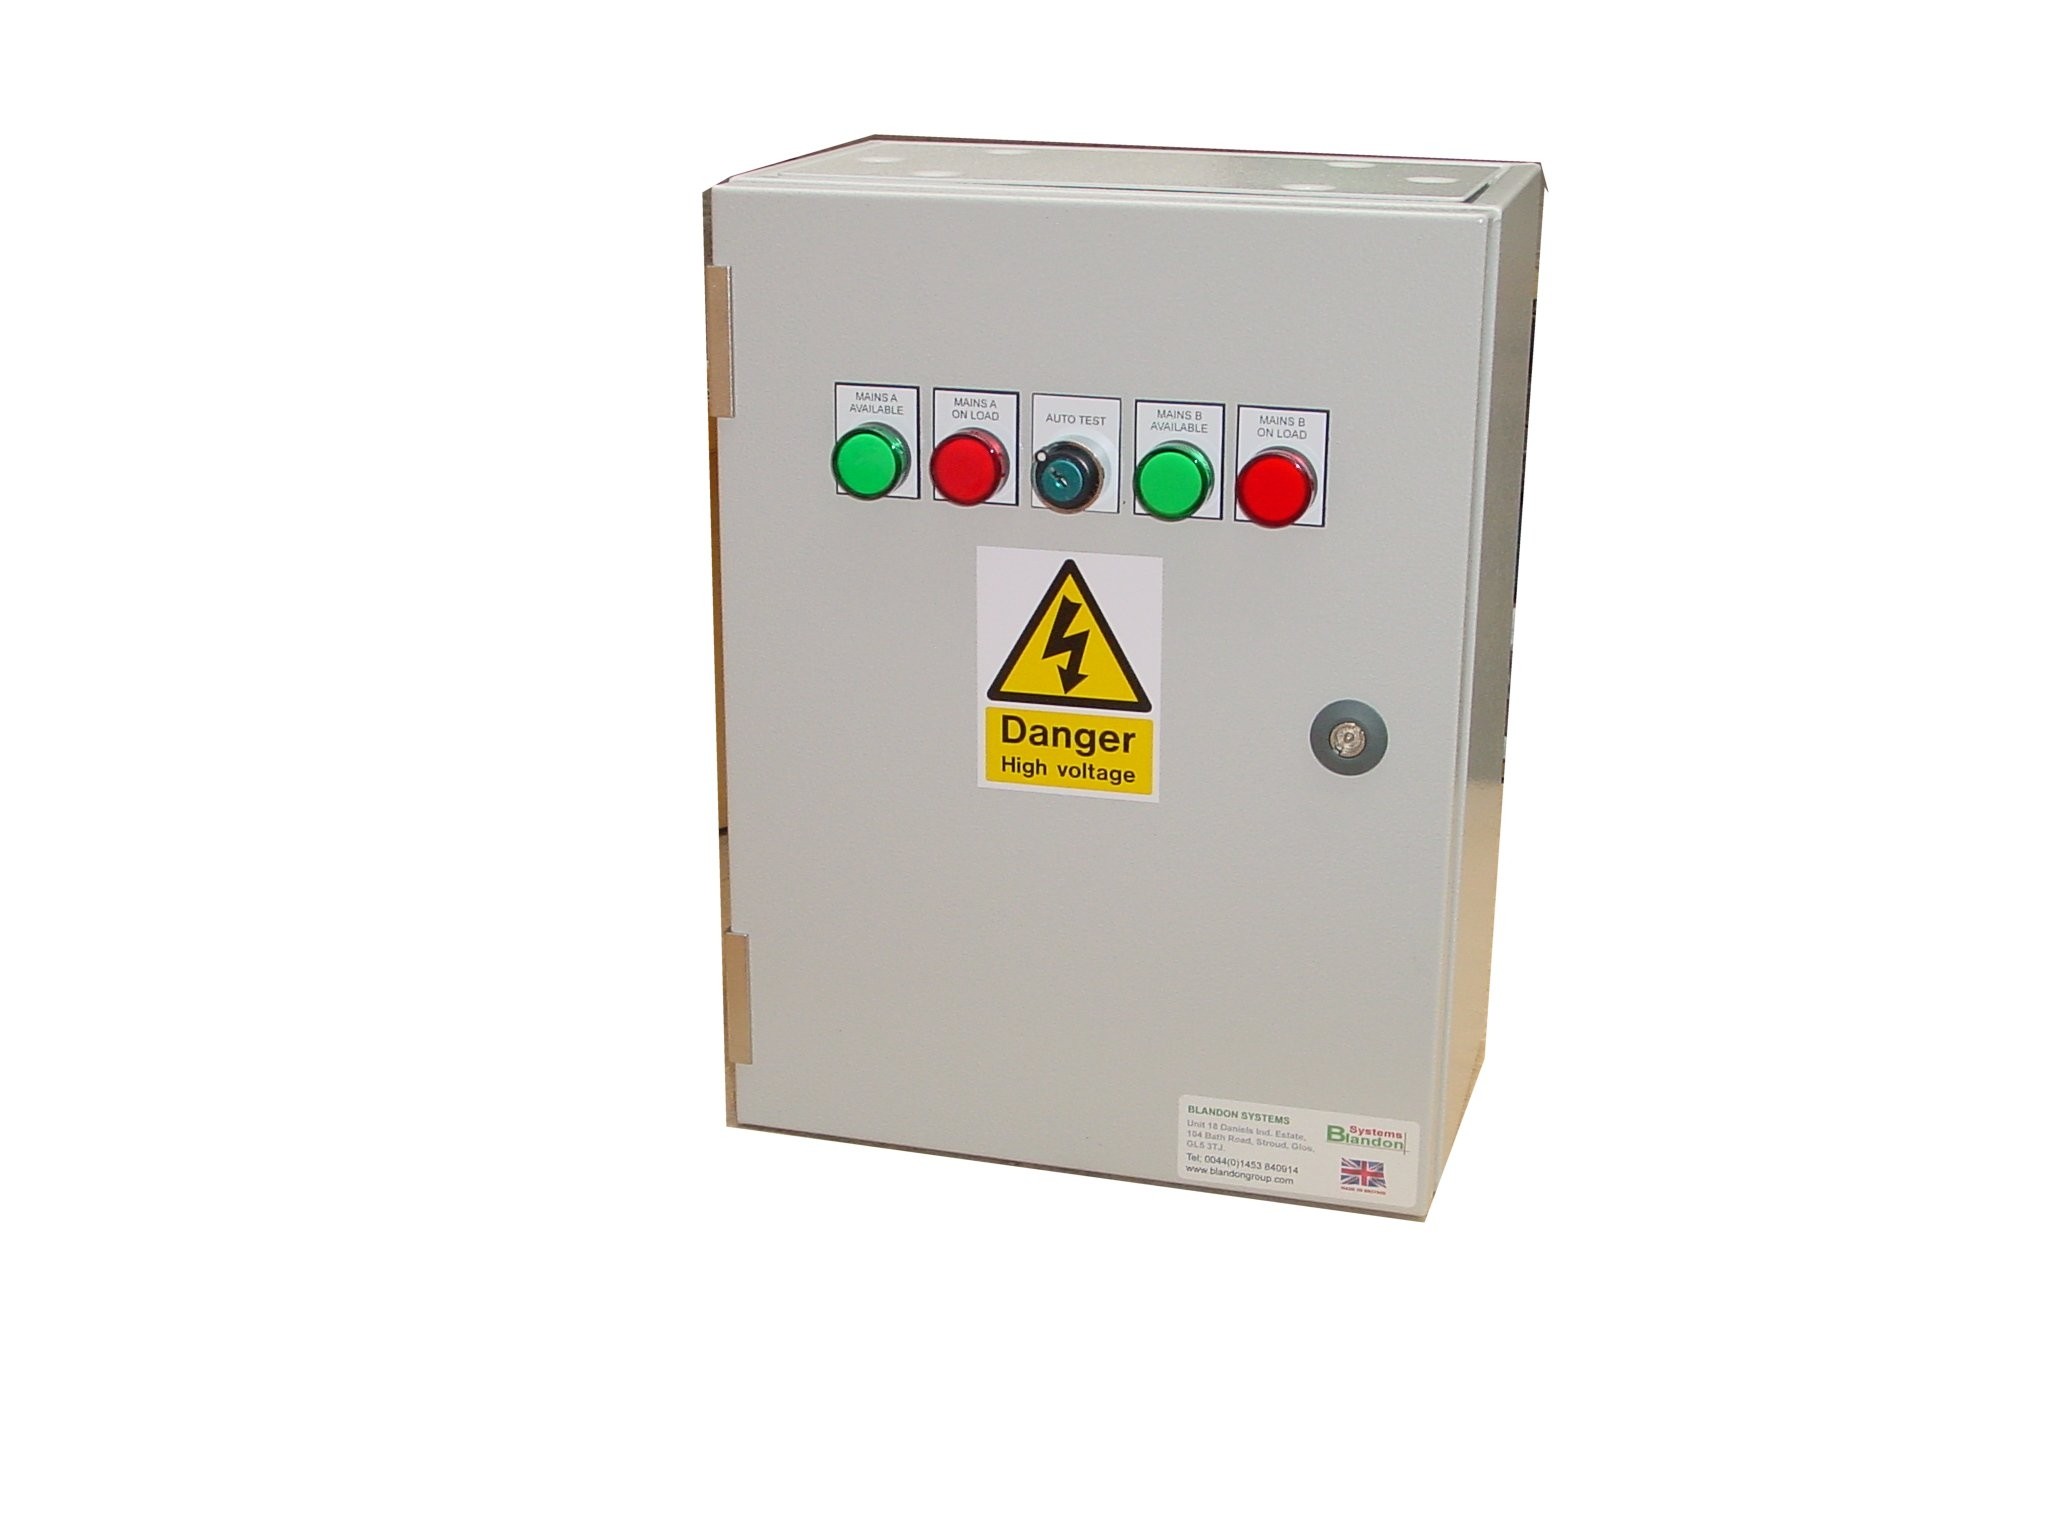 60A ATS 3 Phase Mains-Mains 400V, UVR Controlled, ABB Contactors